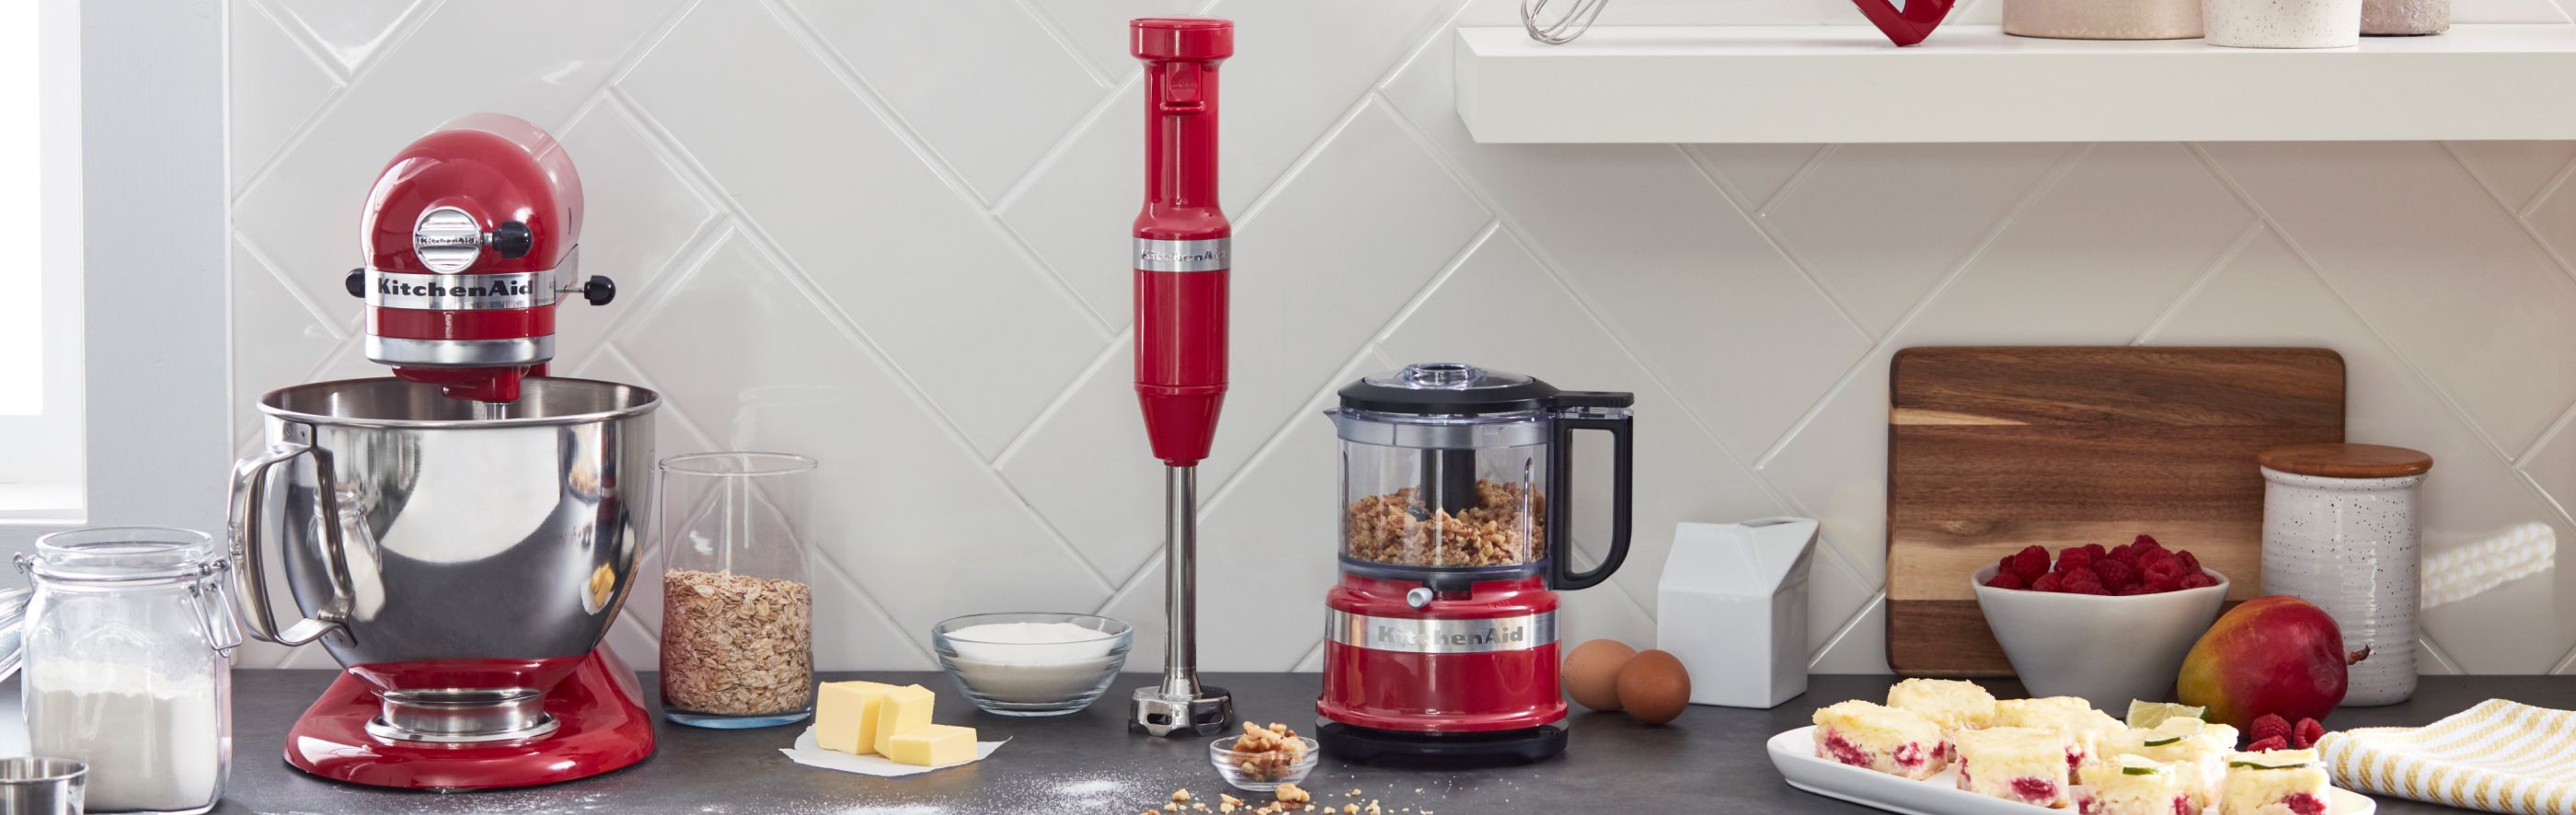 Collection of red KitchenAid brand countertop appliances in a kitchen